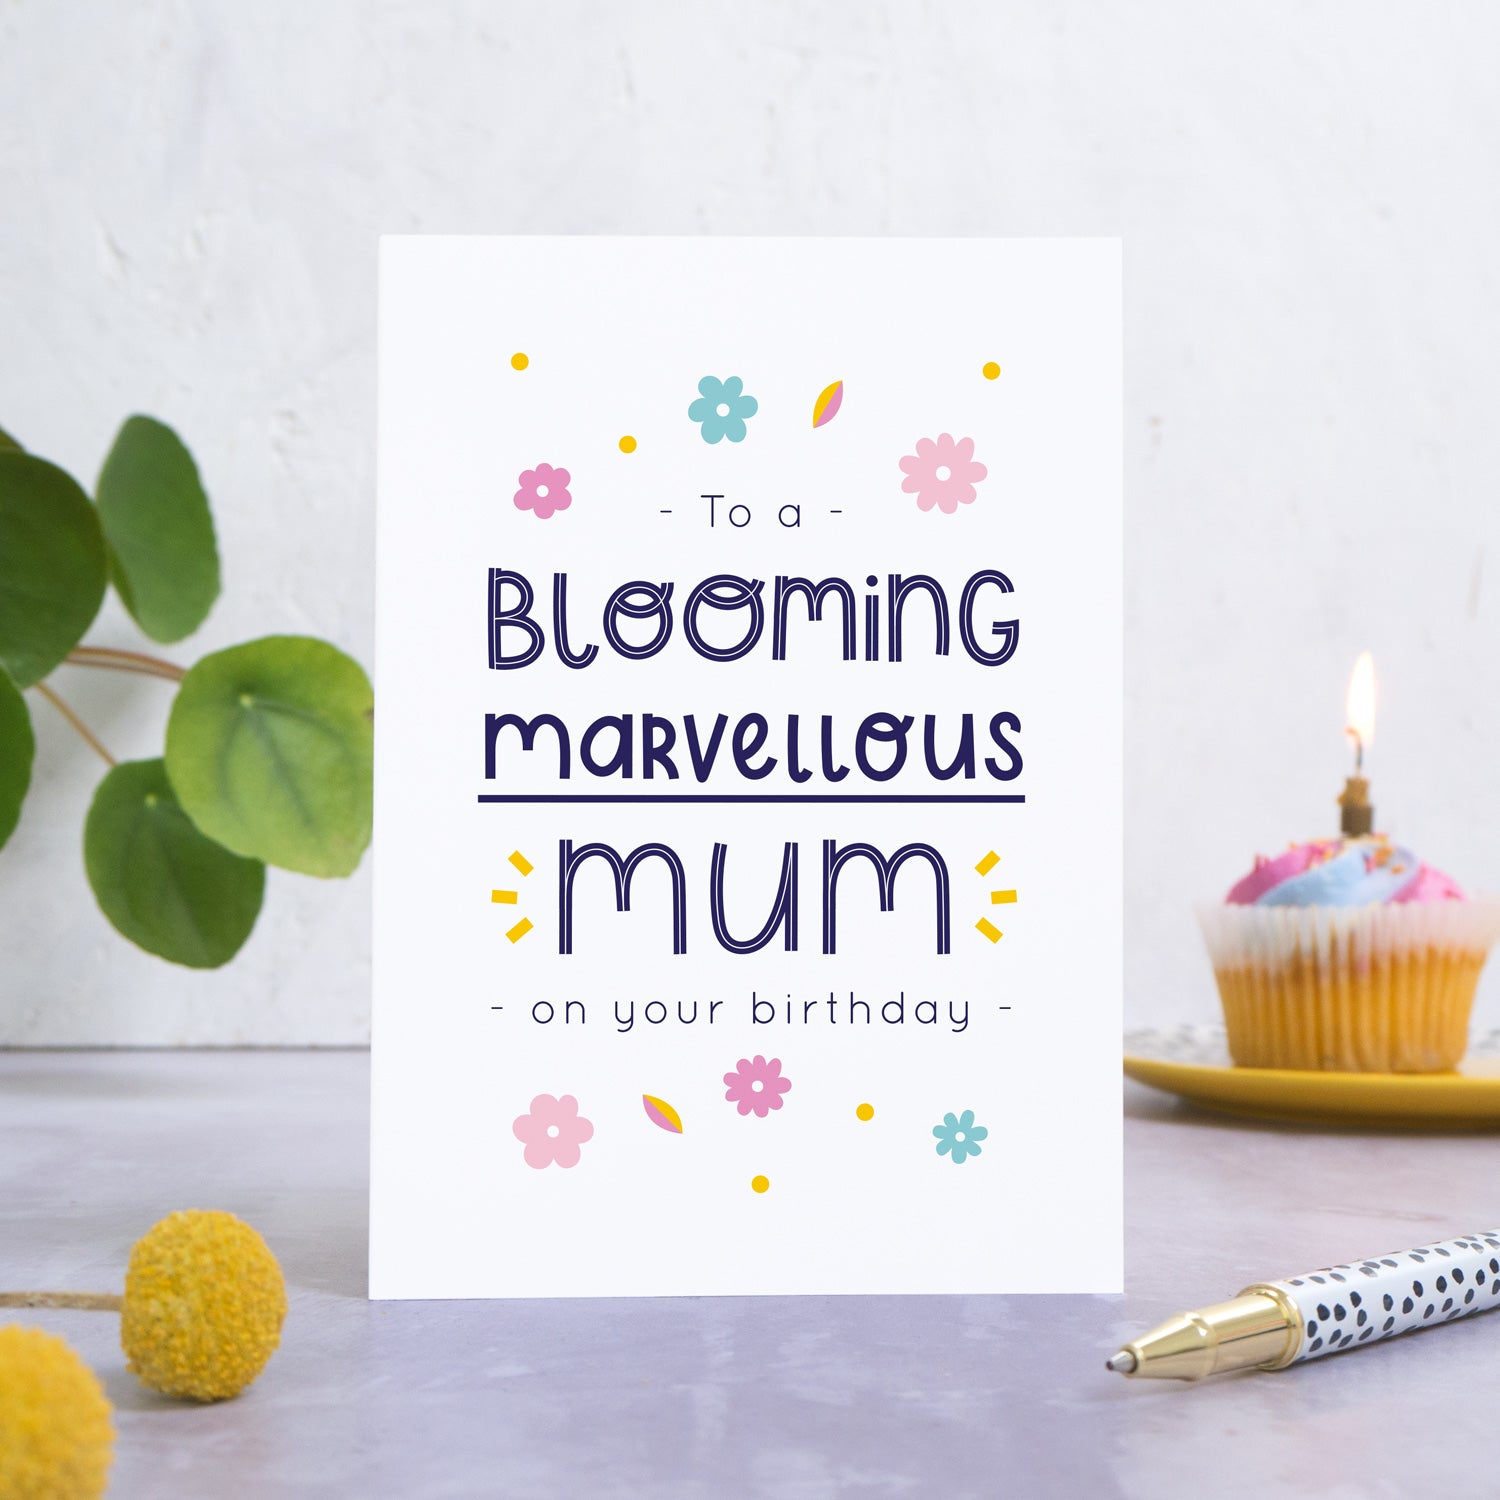 A blooming marvellous mum birthday card photographed standing in front of a white background. In the background is a plant and a birthday cupcake and with a candle. In the foreground are two yellow flowers and a spotty pen.